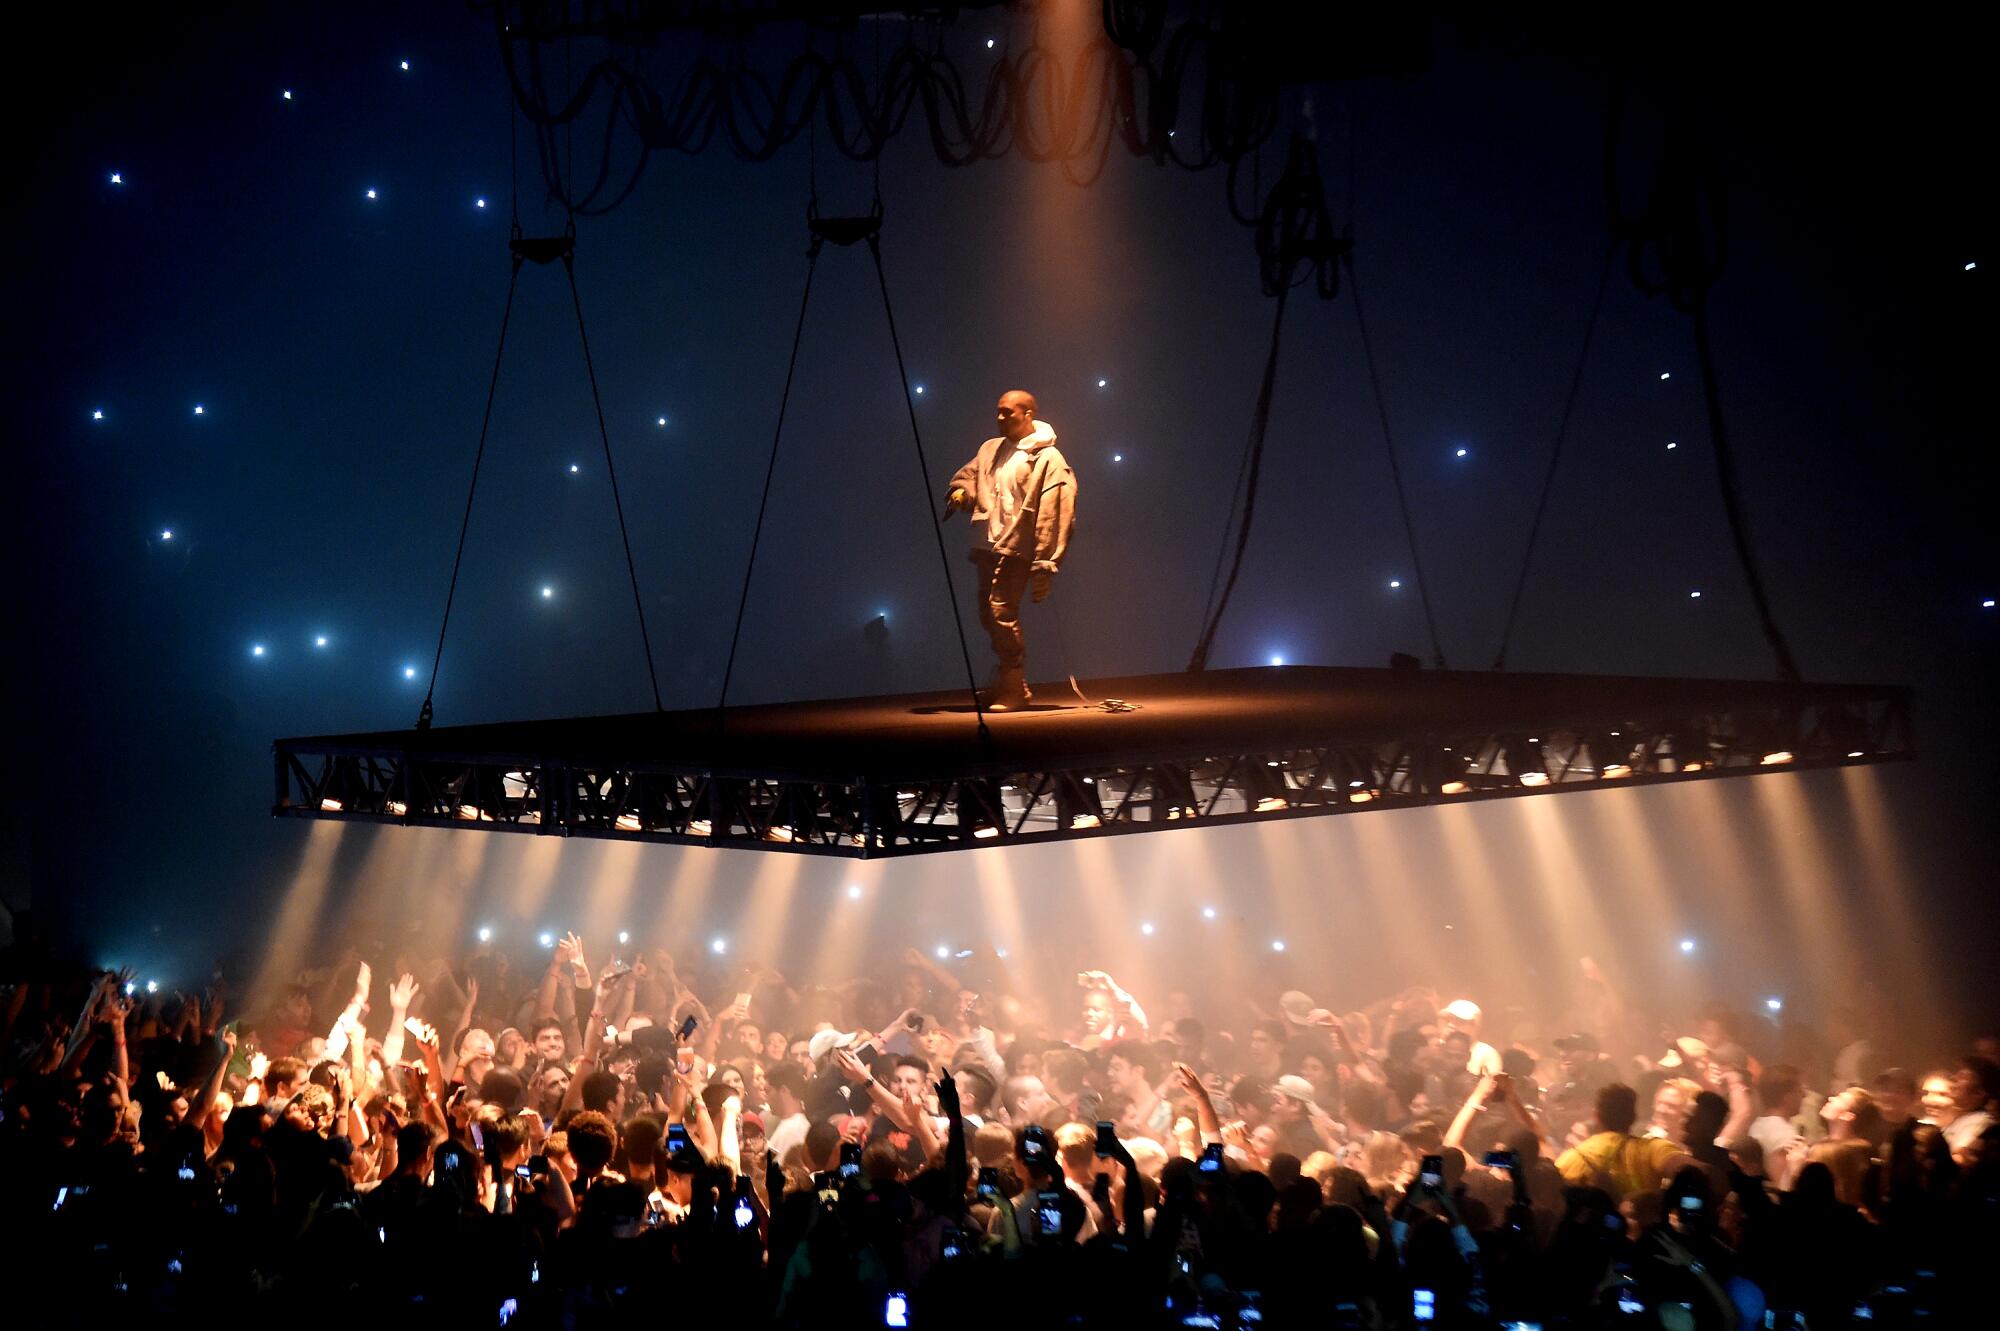 Kanye West performs on top of a platform suspended above a crowd